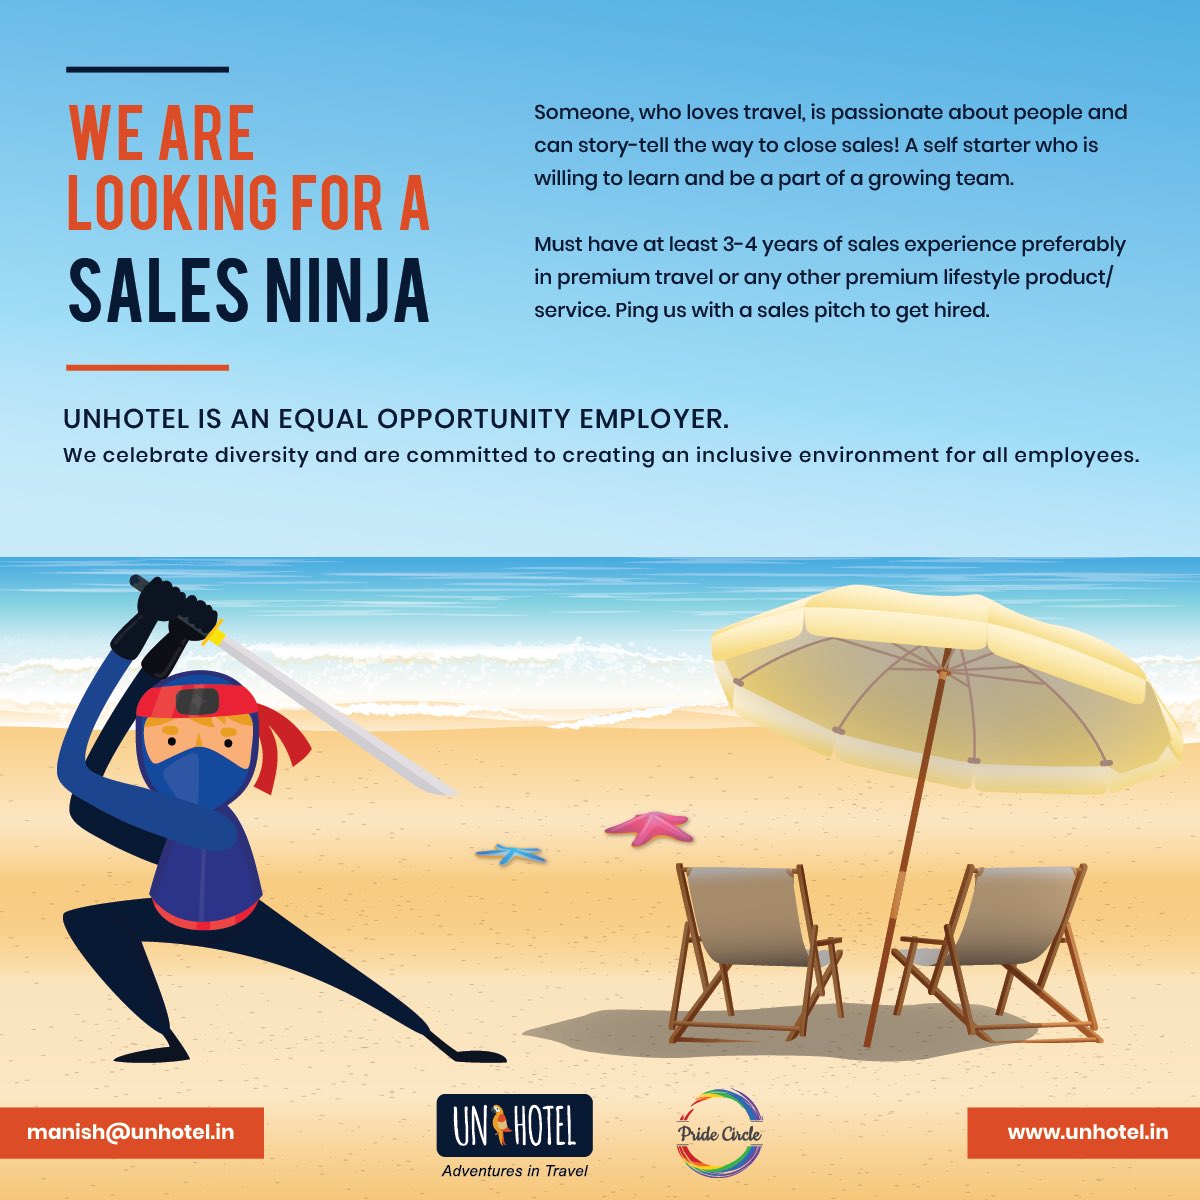 Unhotel is #Hiring! Open to all. Communications. Hardwork. Diligence is all we look for, no other questions asked. #inclusionmatters #CompaniesoftheFuture #inclusiveworkspaces #travelcompany #delhijobs #gurgaonjobs #gurugram